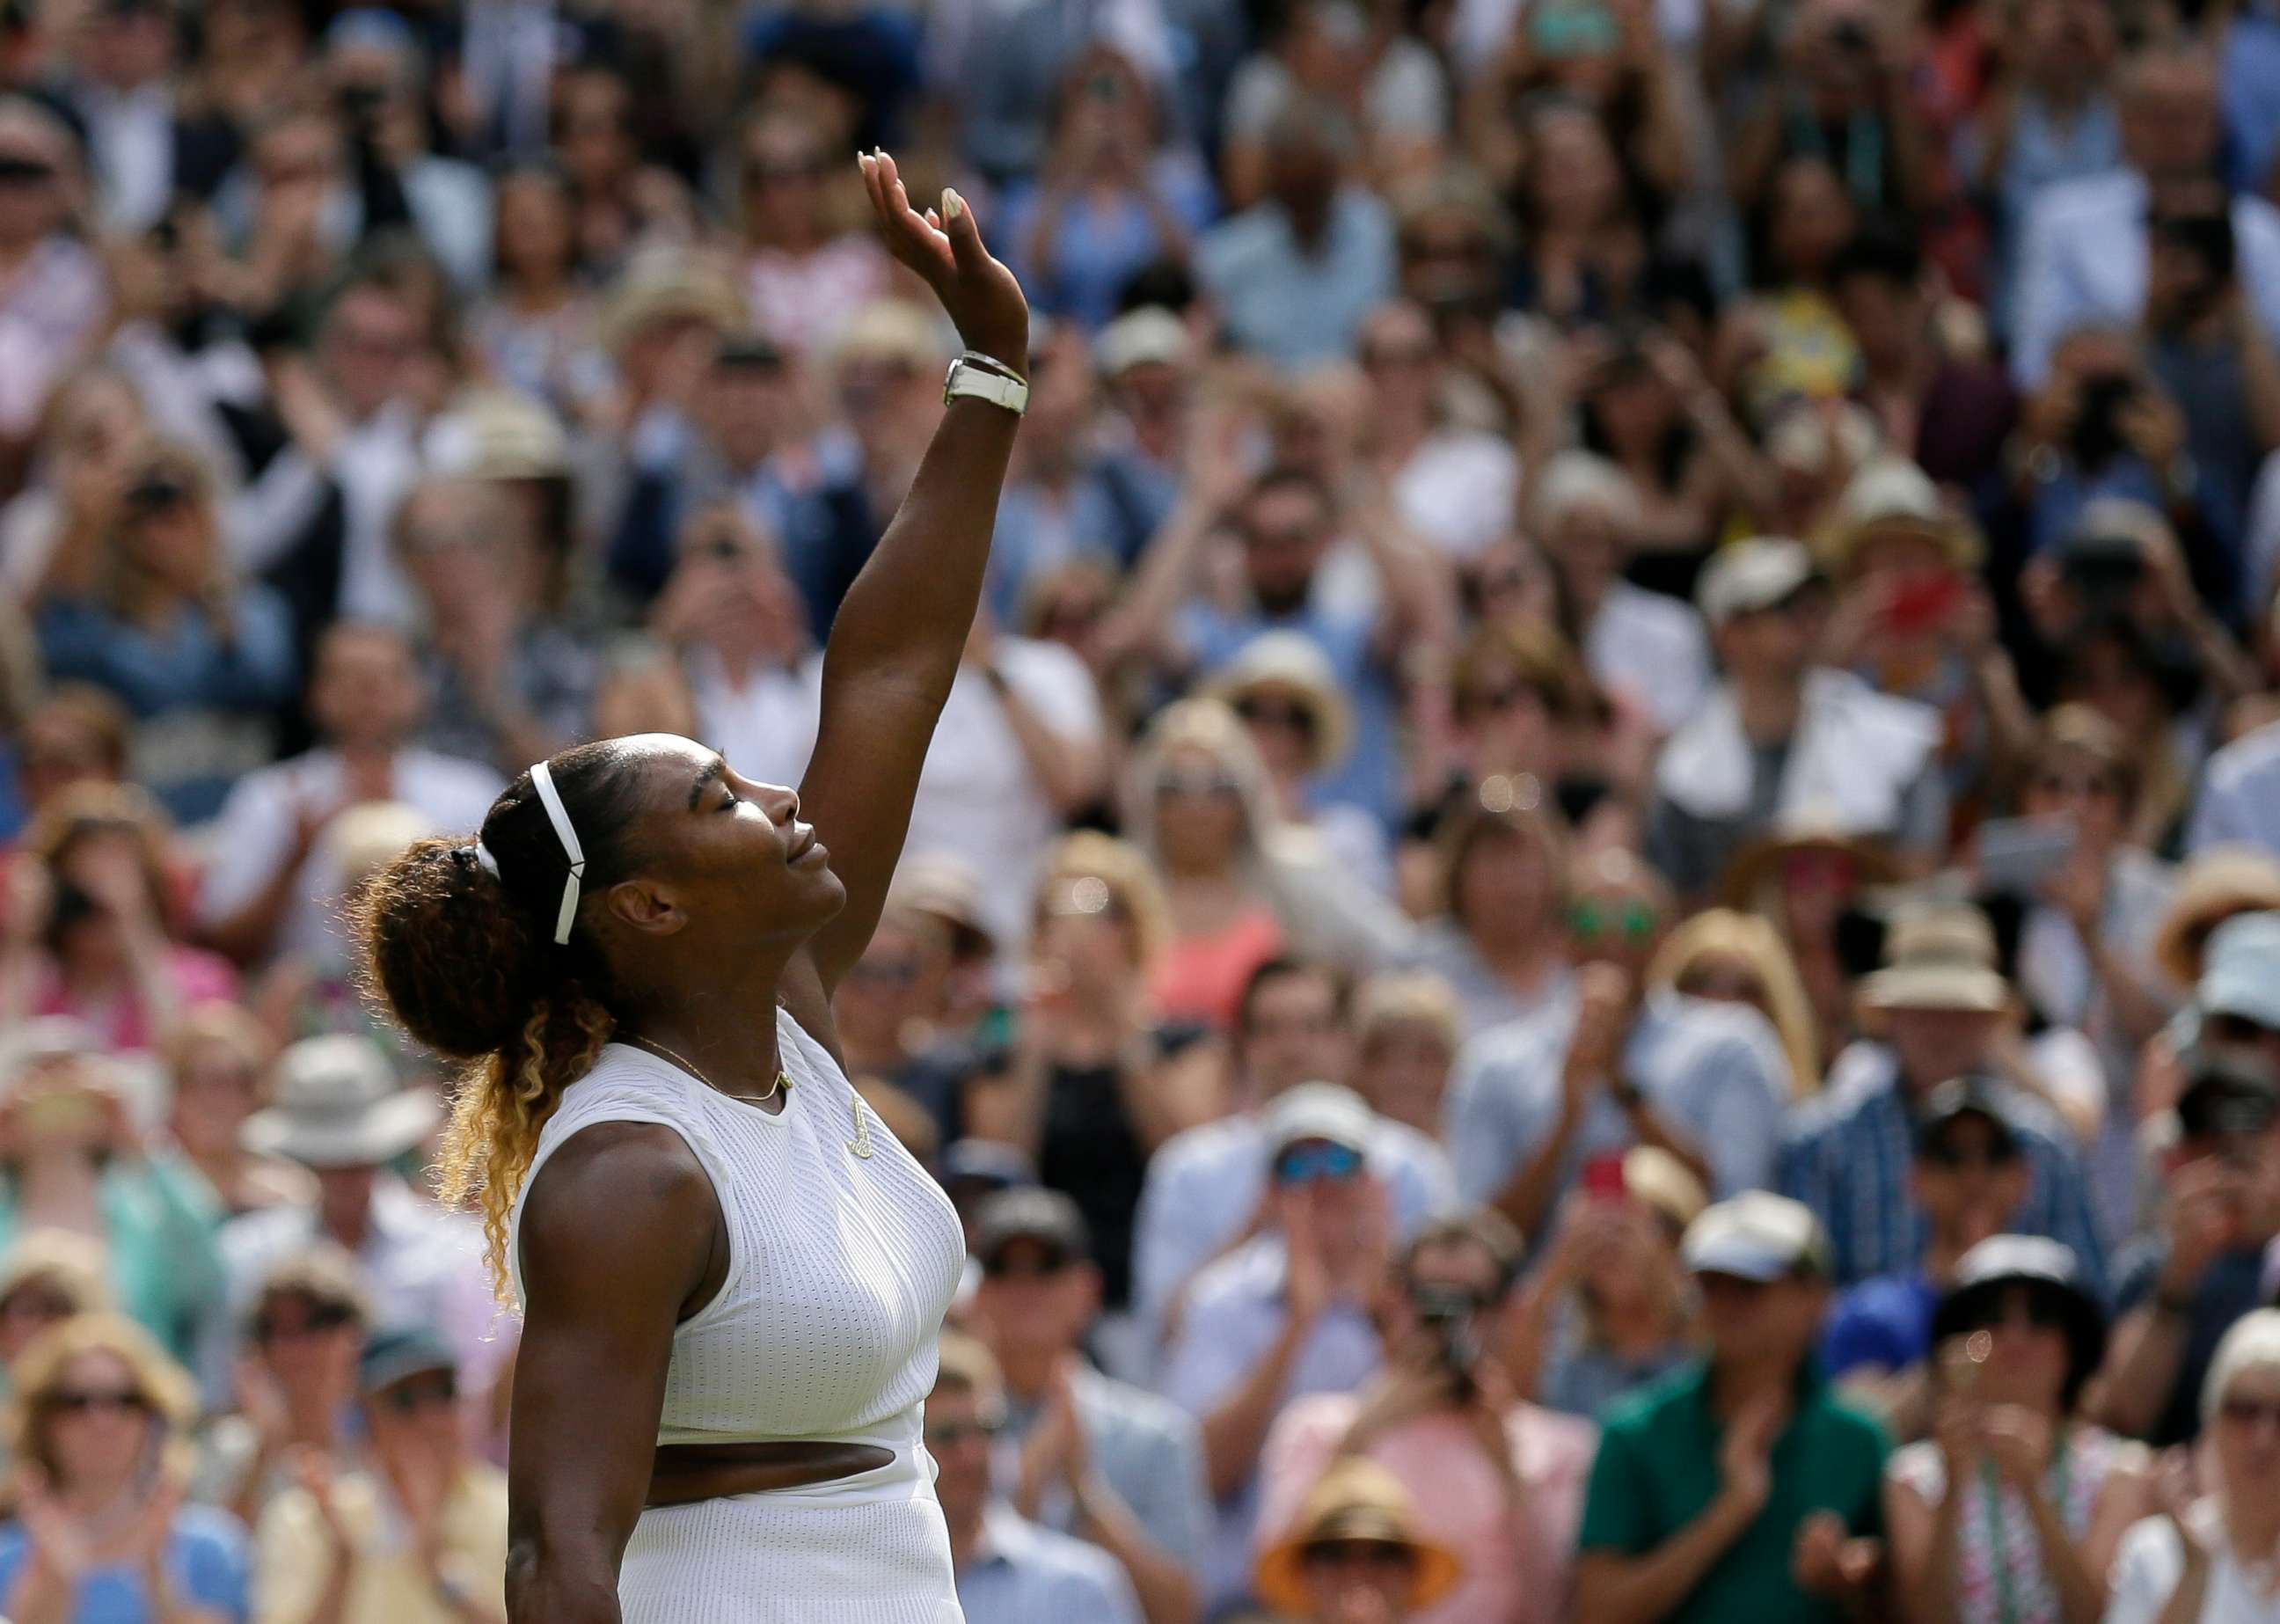 PHOTO: Serena Williams celebrates defeating Czech Republic's Barbora Strycova during a women's singles semifinal match on day ten of the Wimbledon Tennis Championships in London, July 11, 2019.